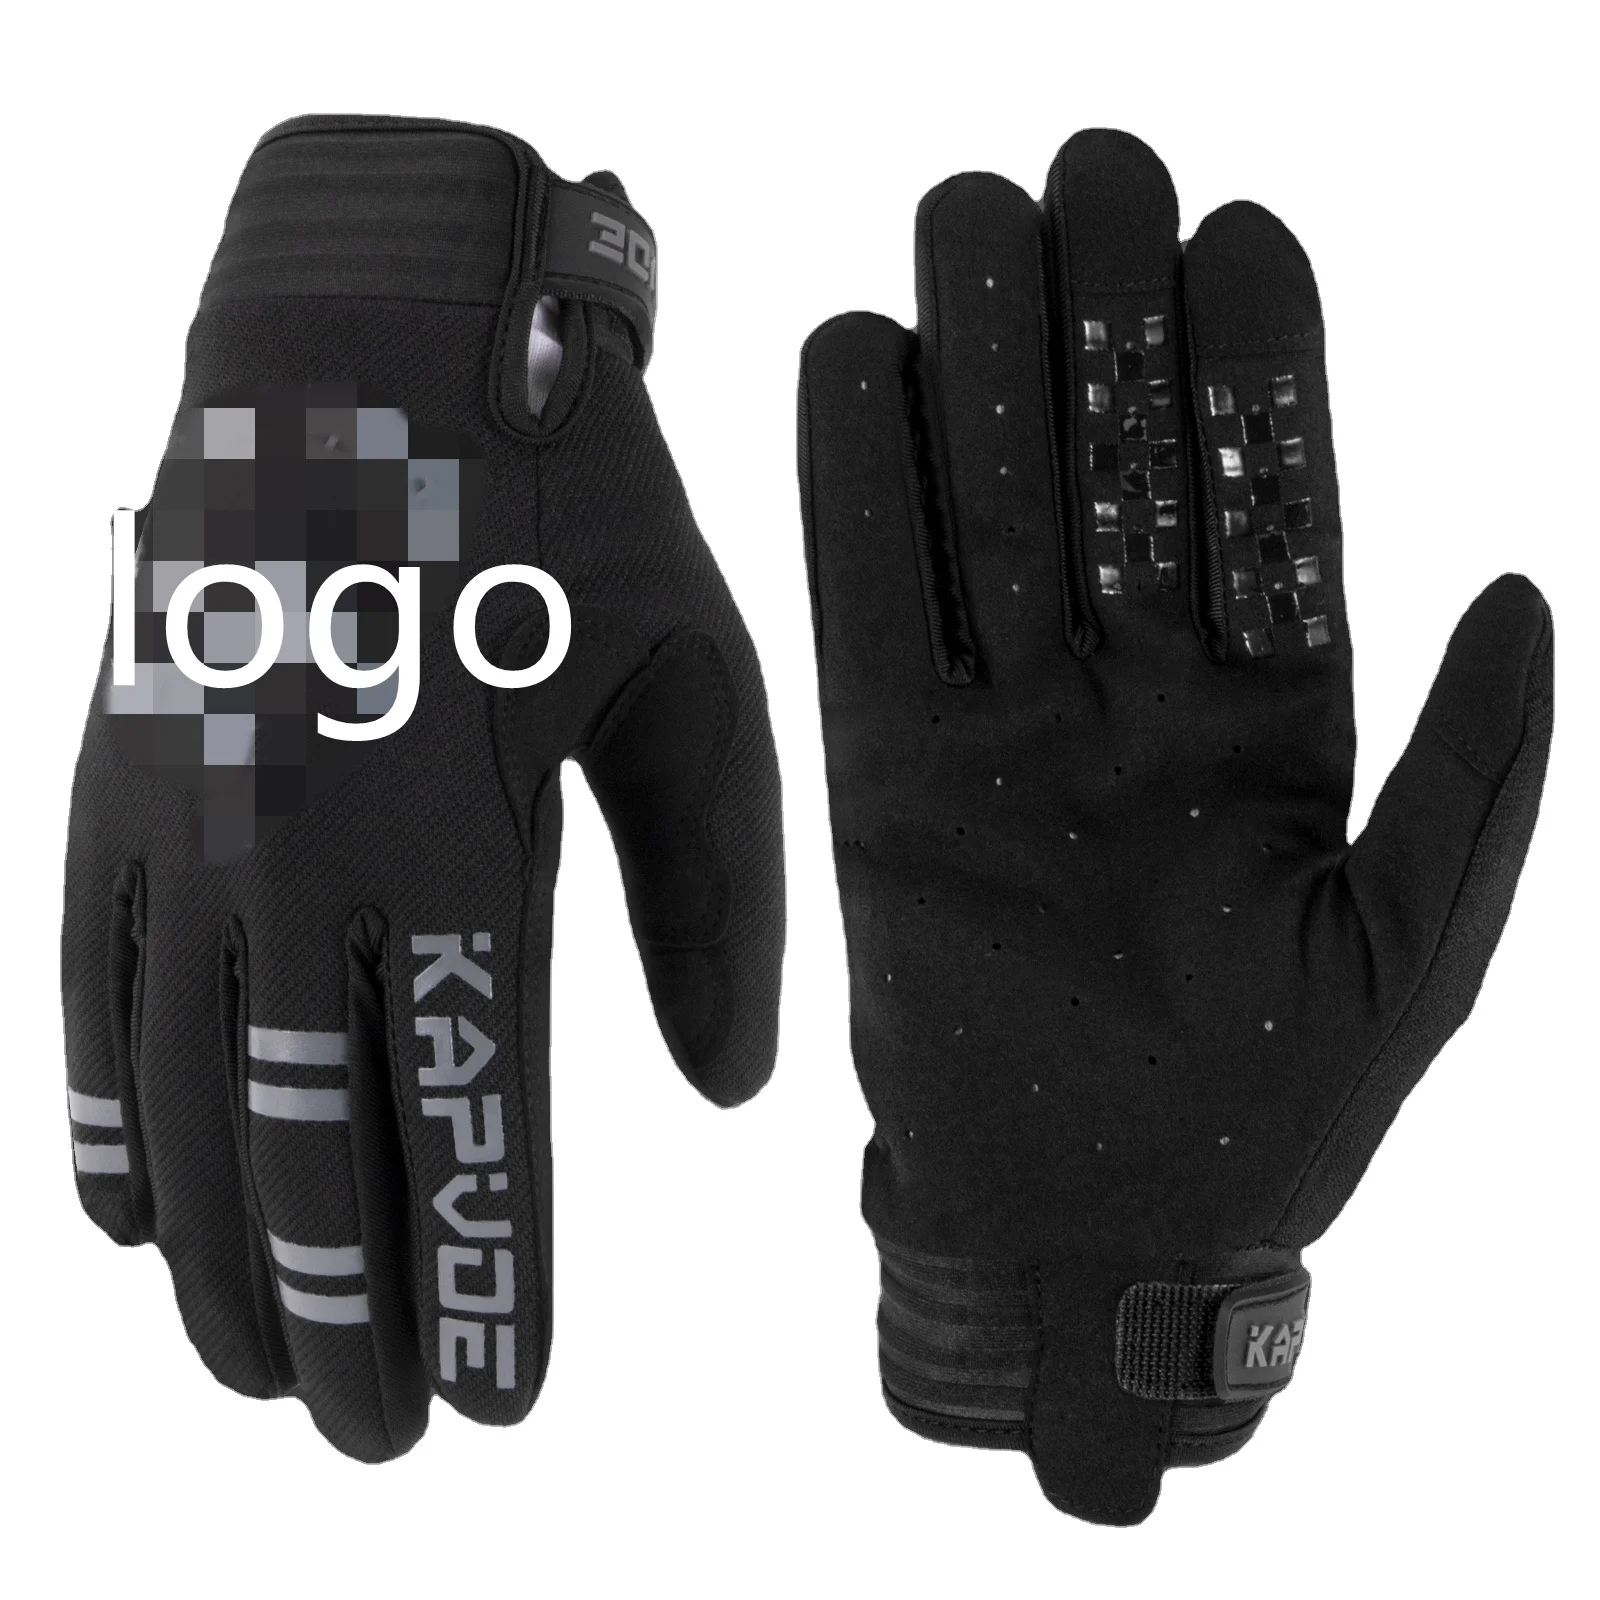 

2021 Custom Professional Oem Mtb Bike Men Bicycle Long Finger Gym Racing Touchscreen For Hand Glove Cycling Glove Full Finger, As show